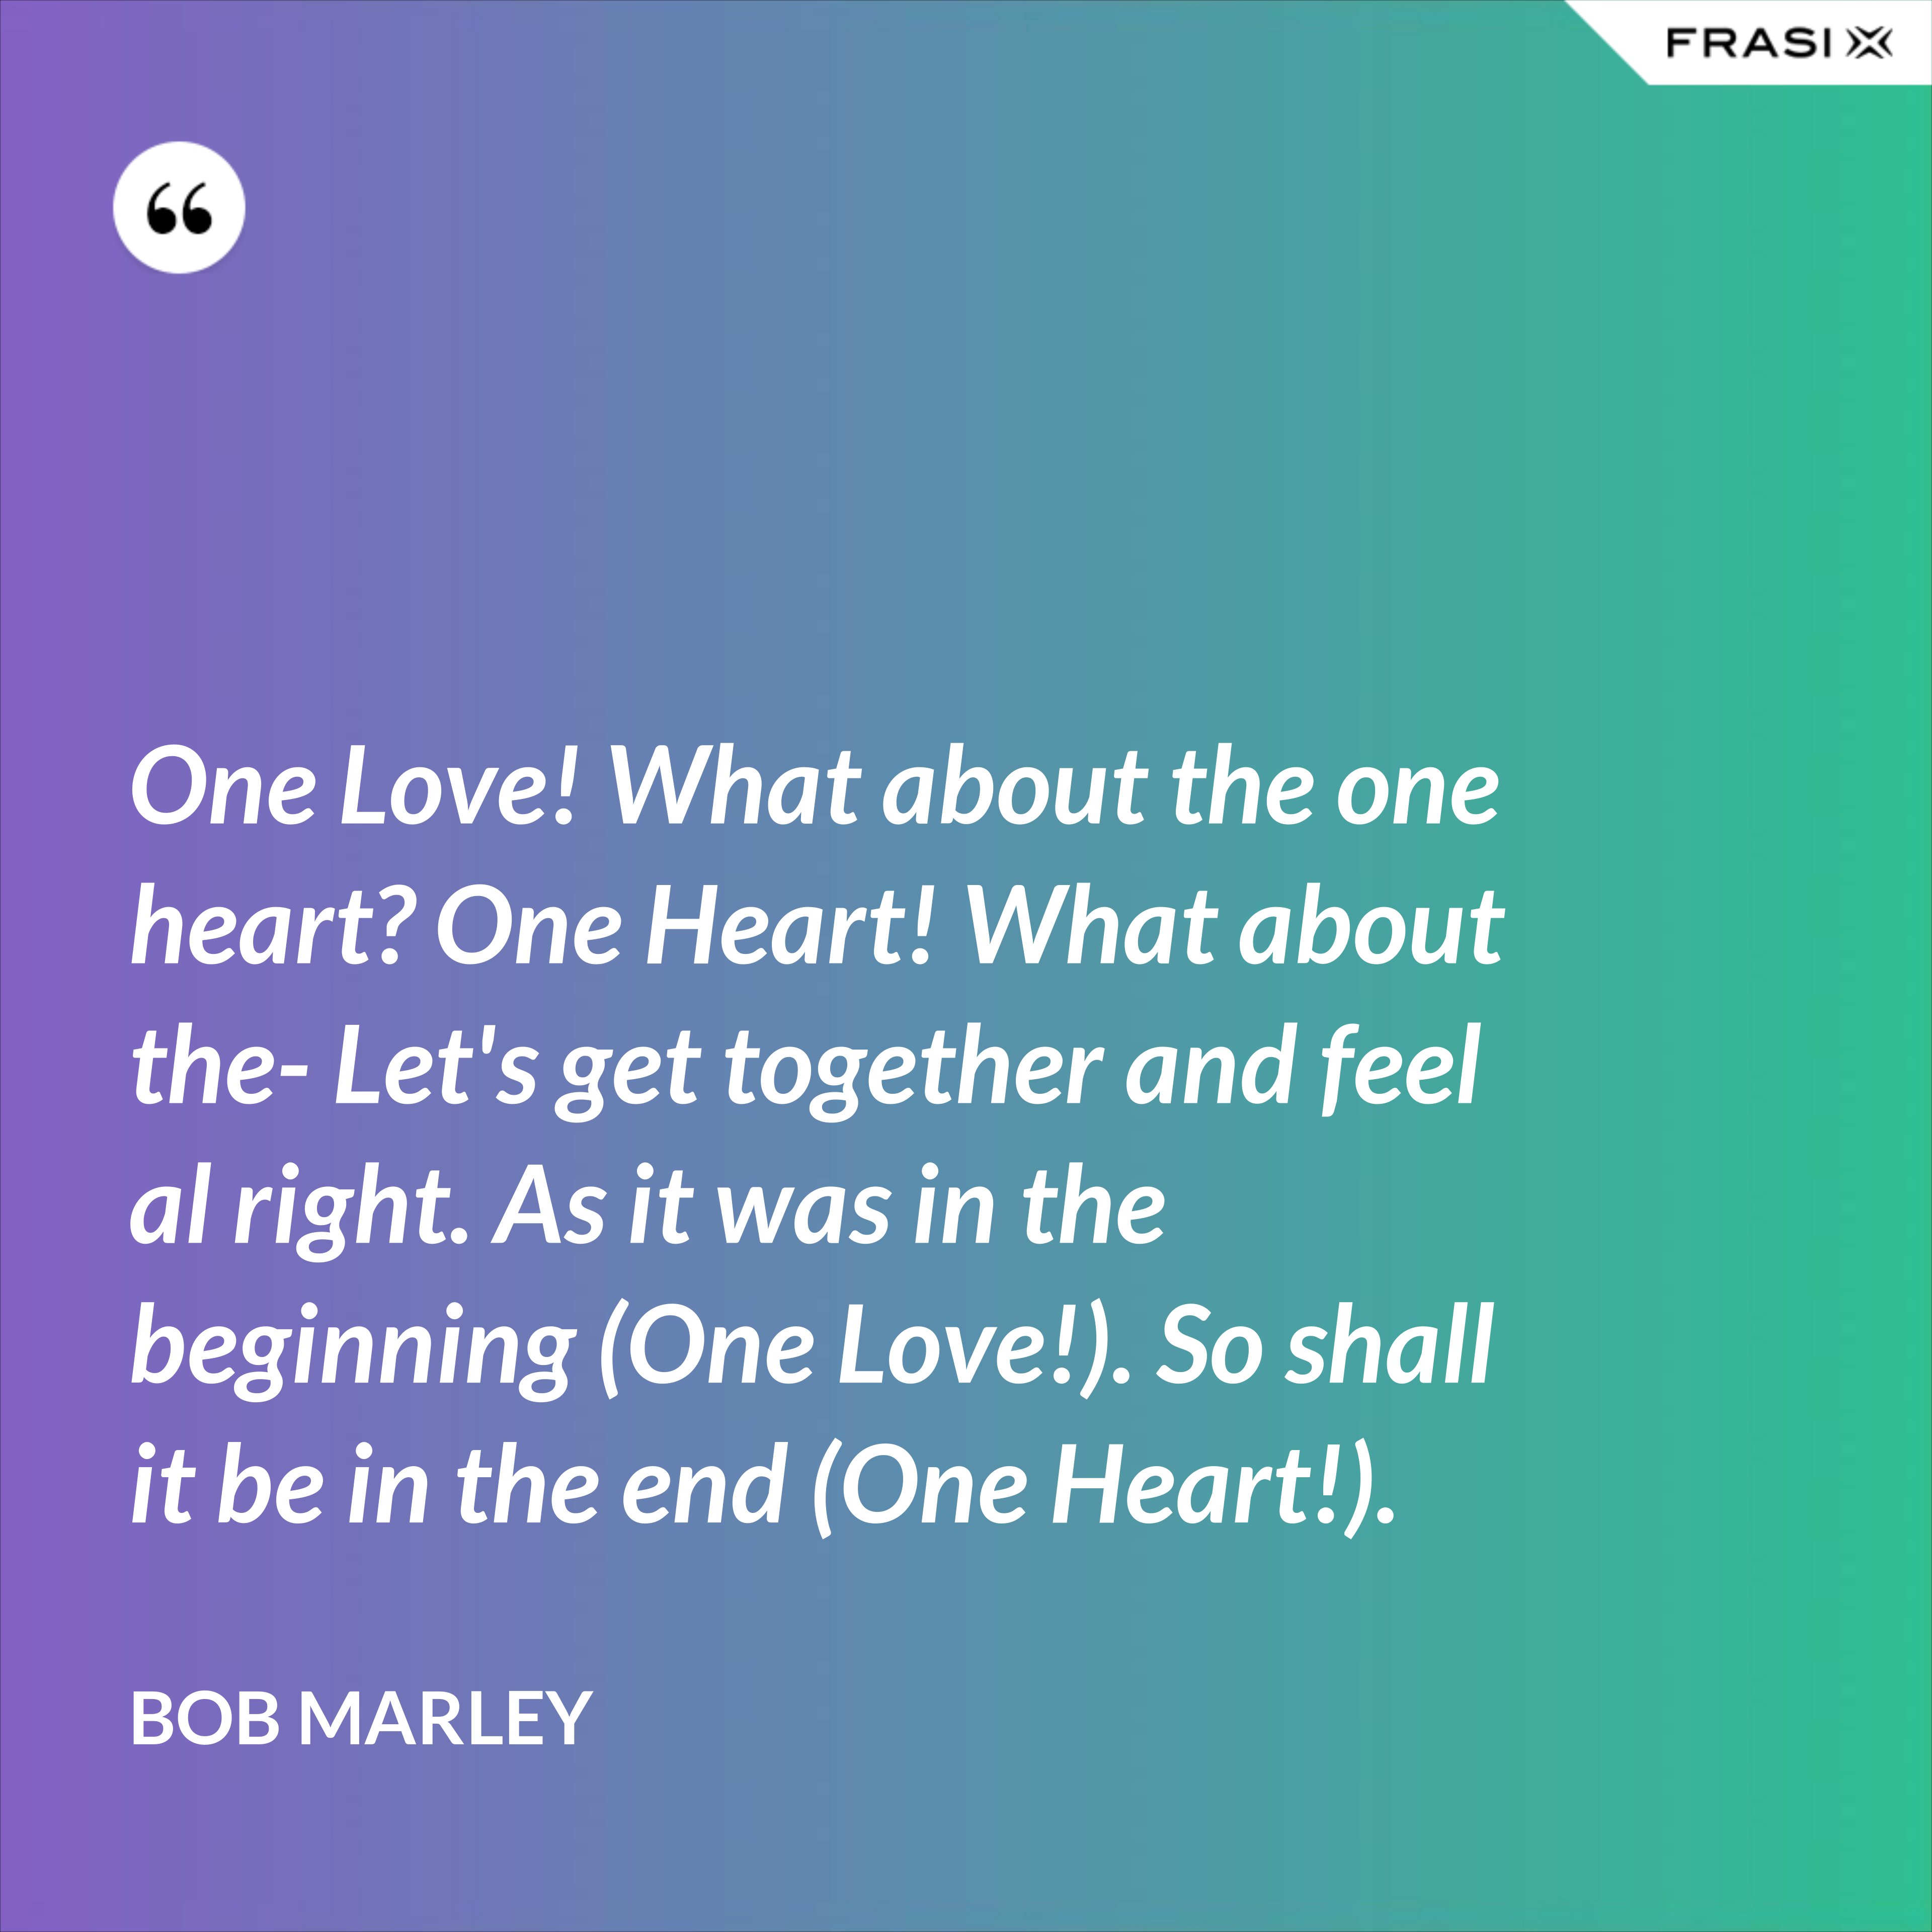 One Love! What about the one heart? One Heart! What about the- Let's get together and feel al right. As it was in the beginning (One Love!). So shall it be in the end (One Heart!). - Bob Marley